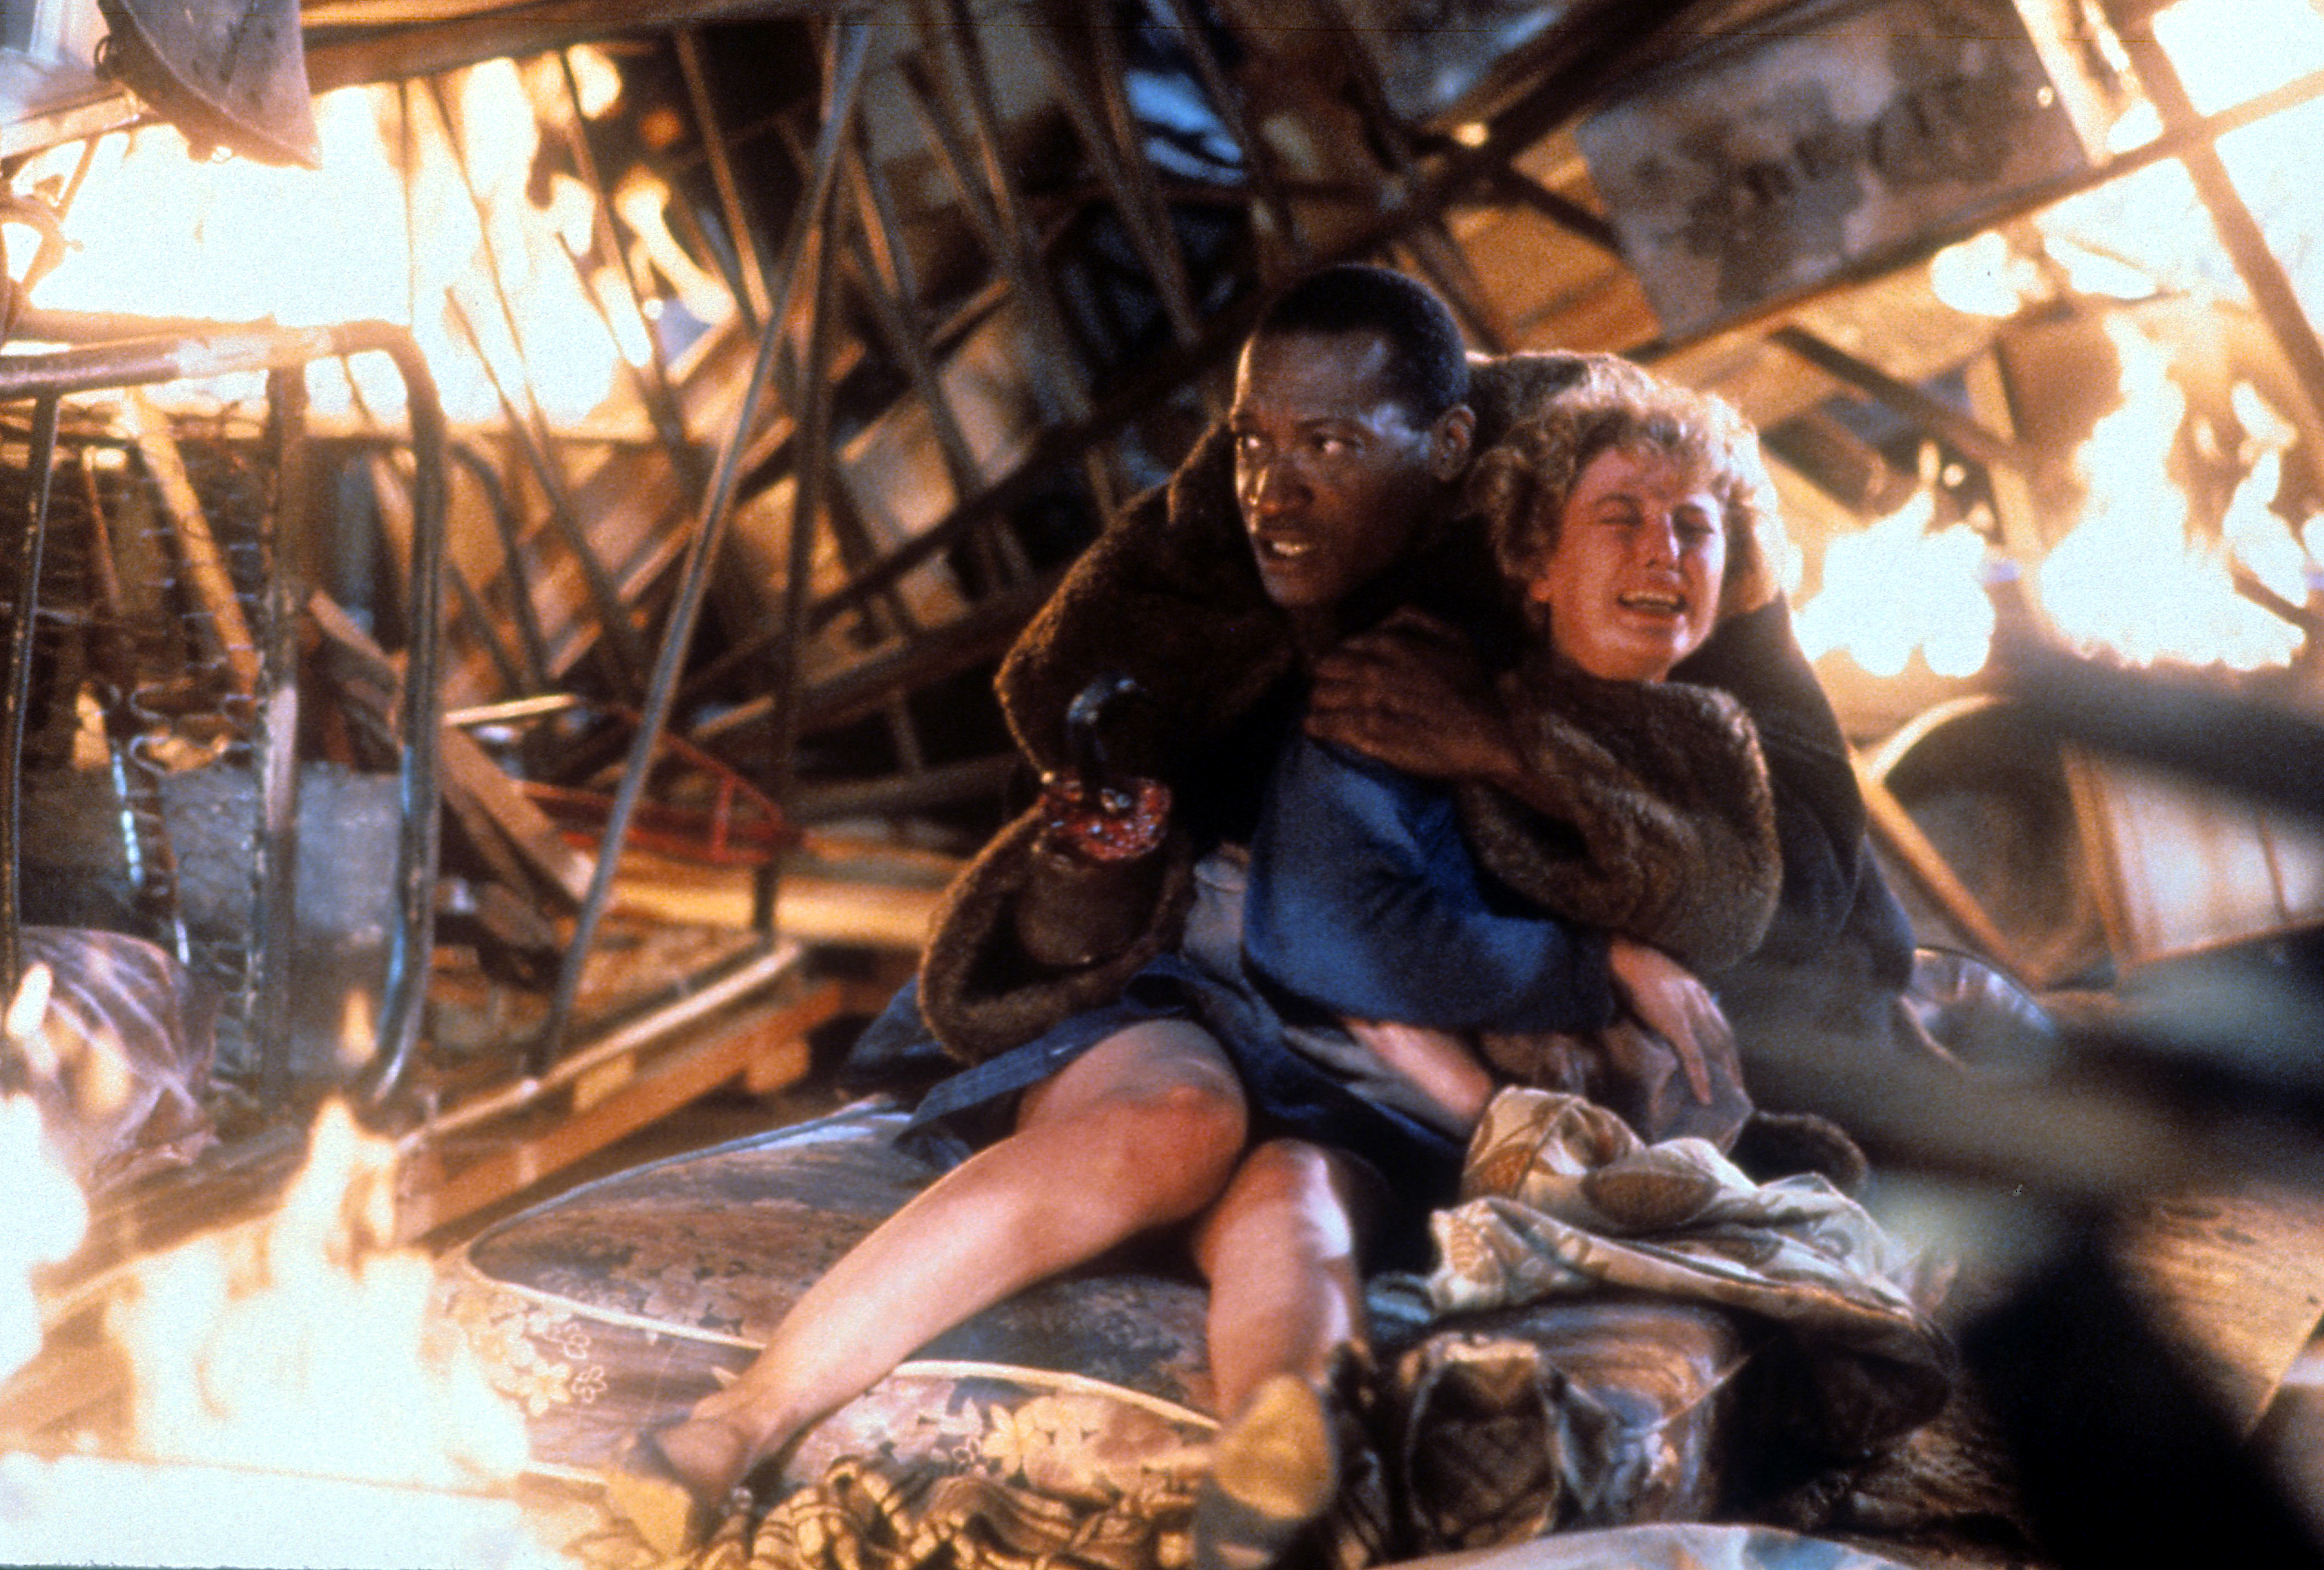 How to Watch the 2021 ‘Candyman’ Horror Movie